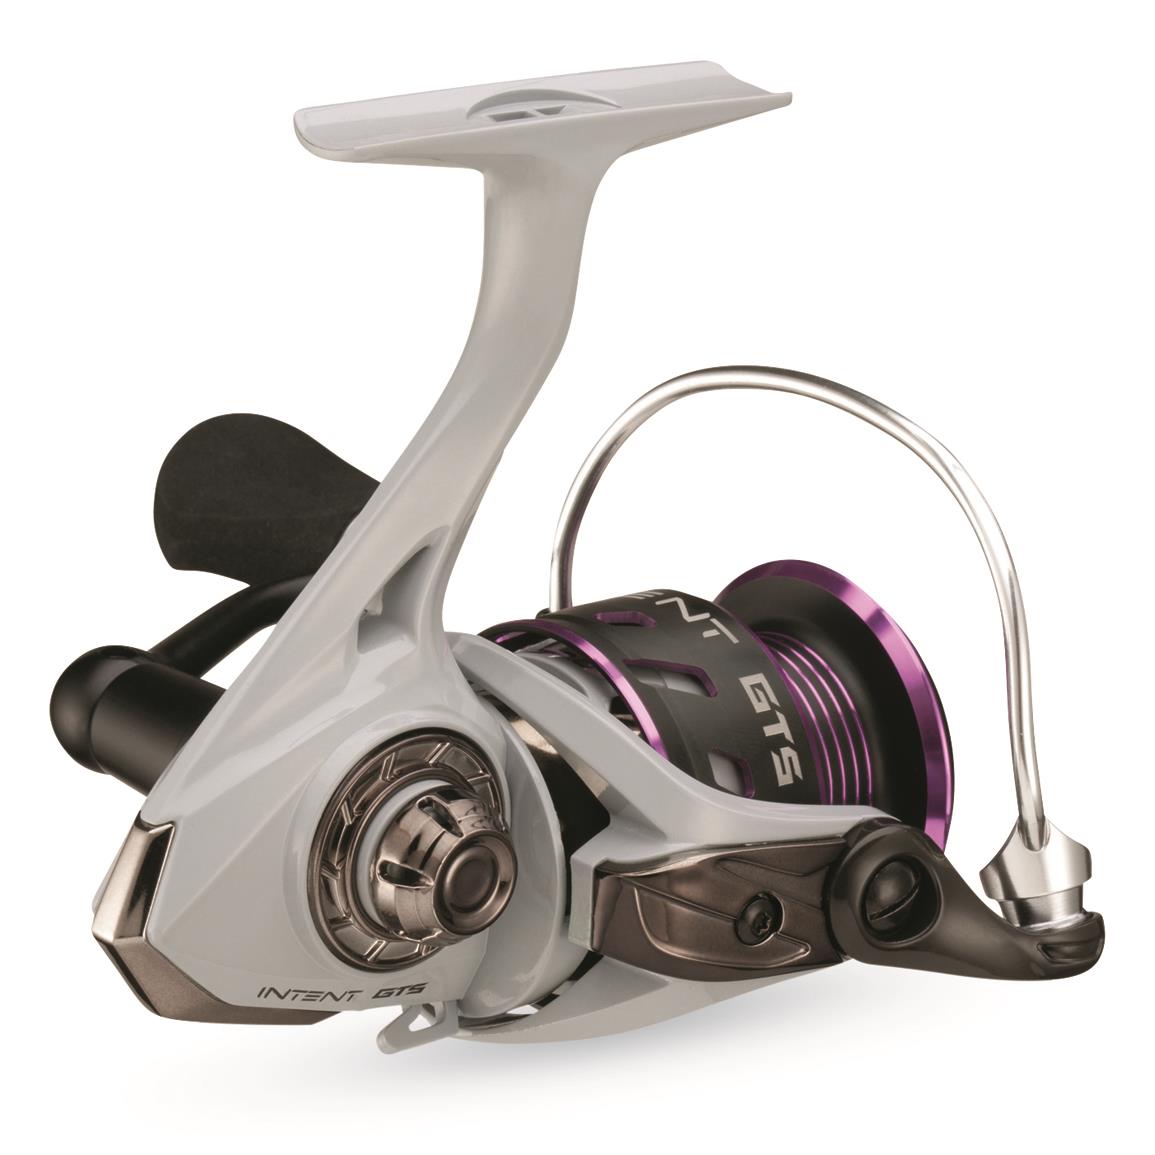 ONE3 Fishing Origin A Baitcasting Reel with Defy White Rod Combo - 708331,  Casting Combos at Sportsman's Guide